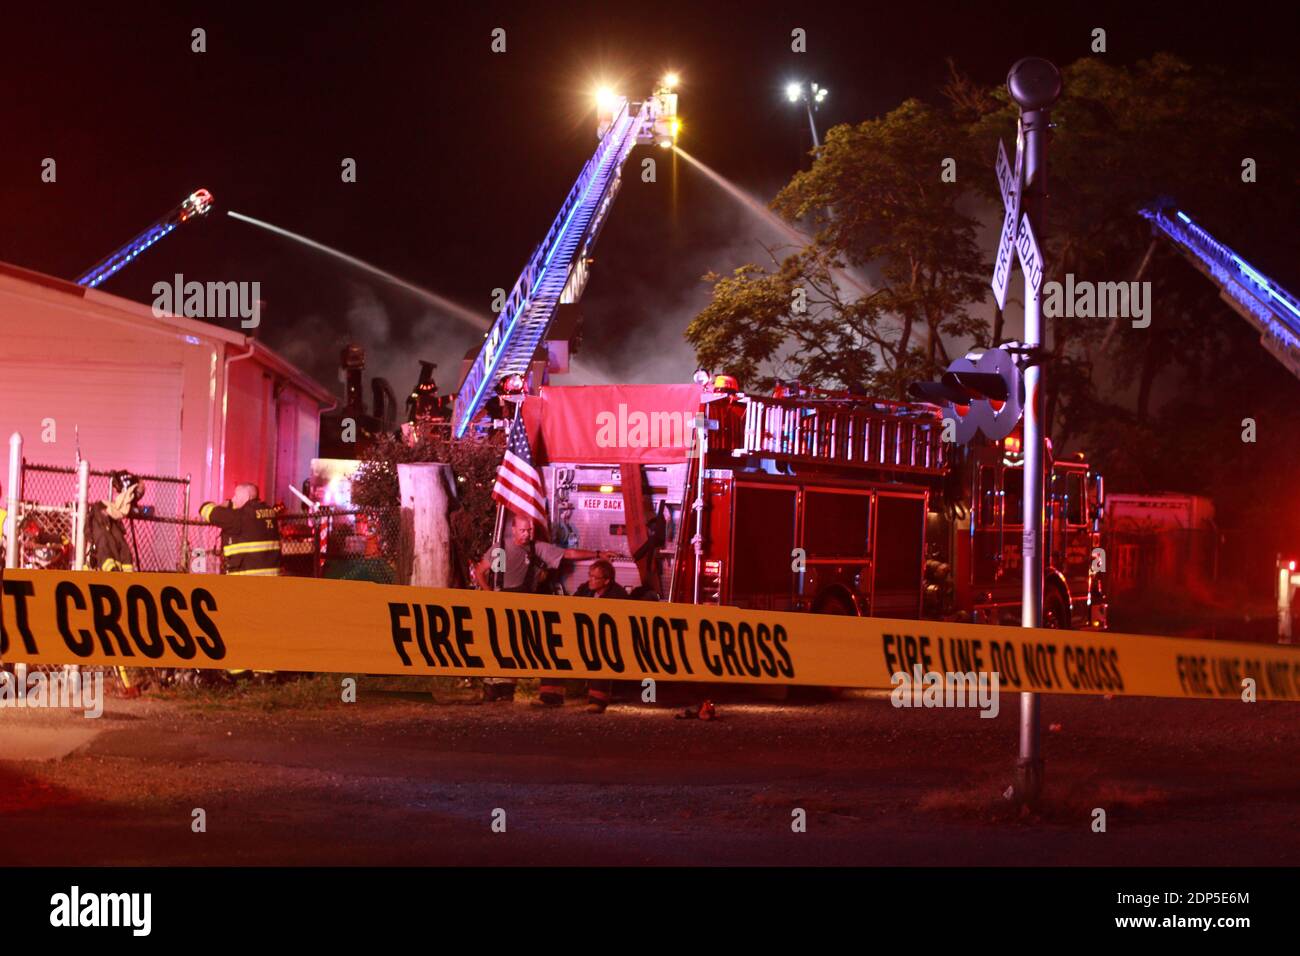 Police and fireline tape to keep people out of a scene or danger. Stock Photo